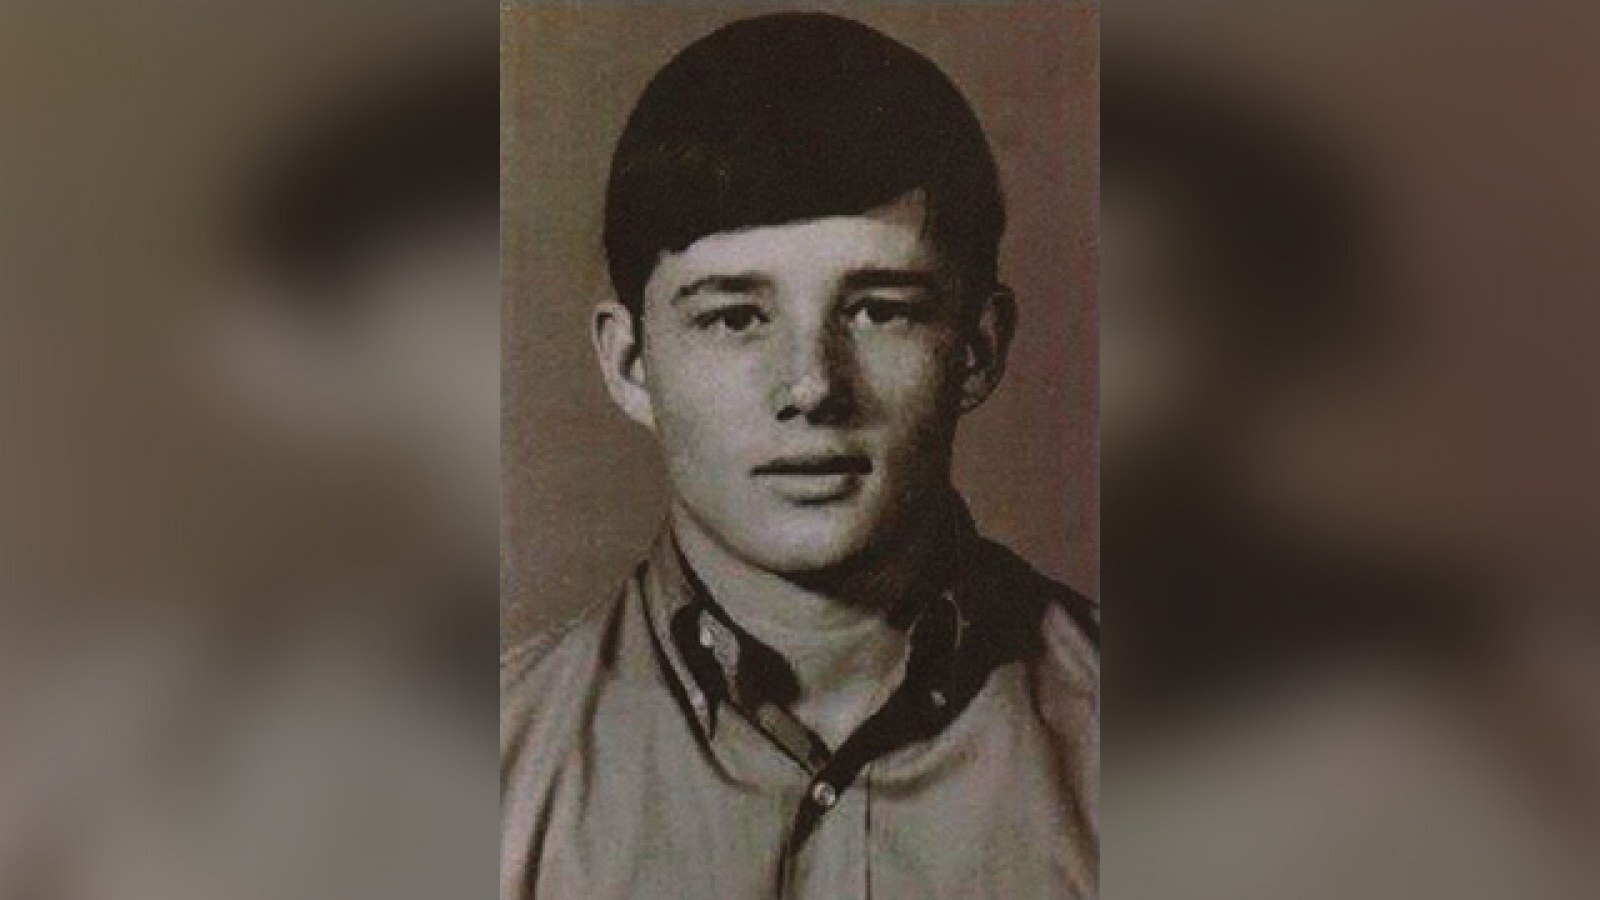 [IMAGE] Hitchhiker Who Disappeared 50 Years Ago ID'd Using DNA From Child He Didn't Know He Had